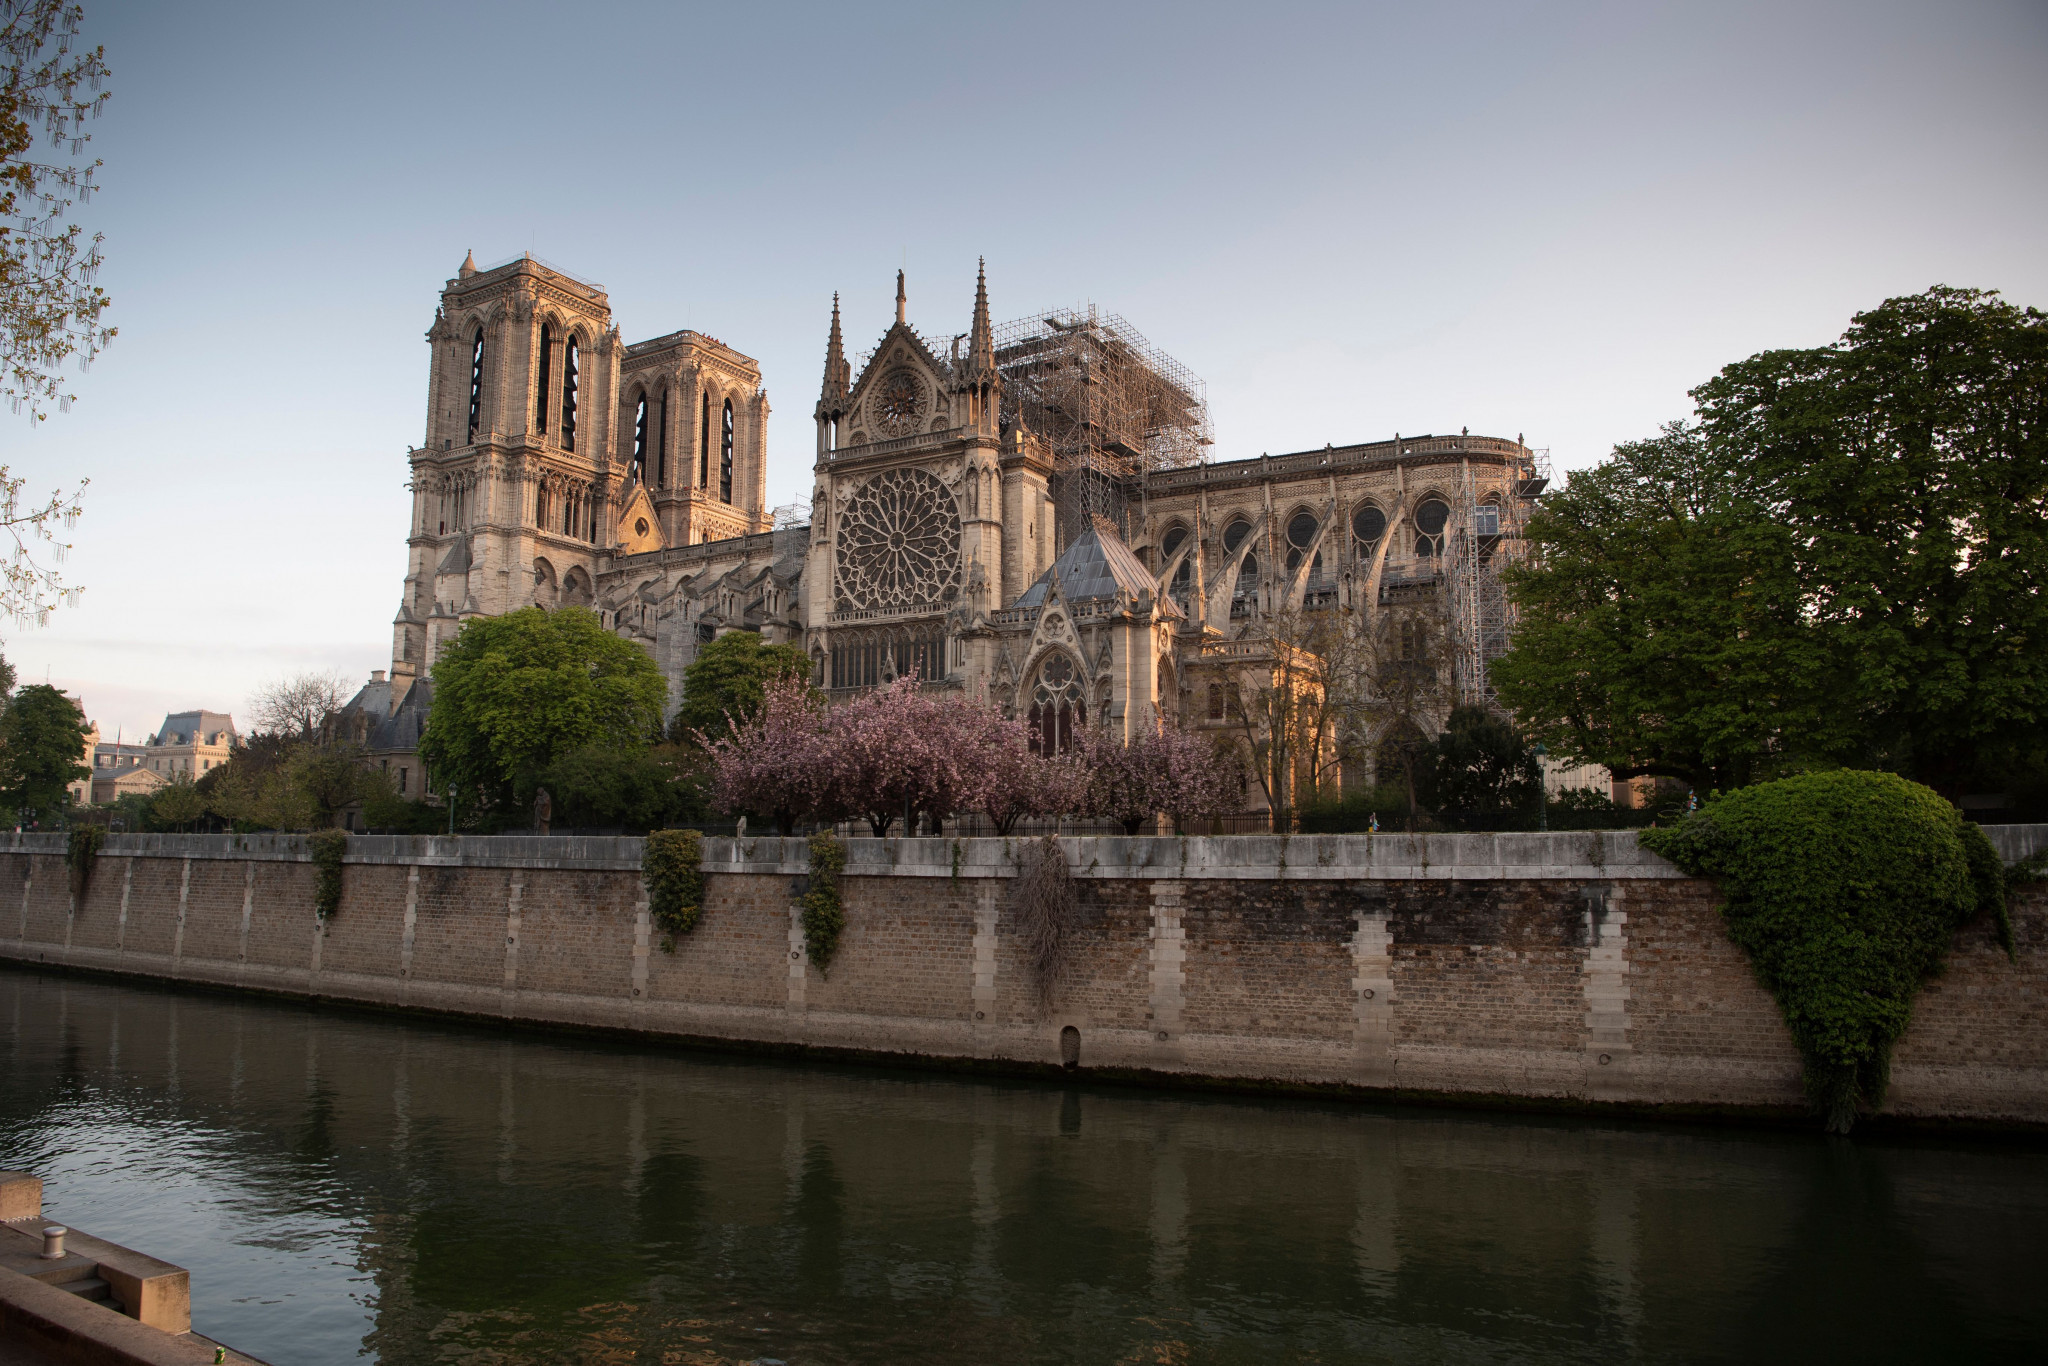 French Culture Minister "confident" Notre-Dame will reopen before Paris 2024